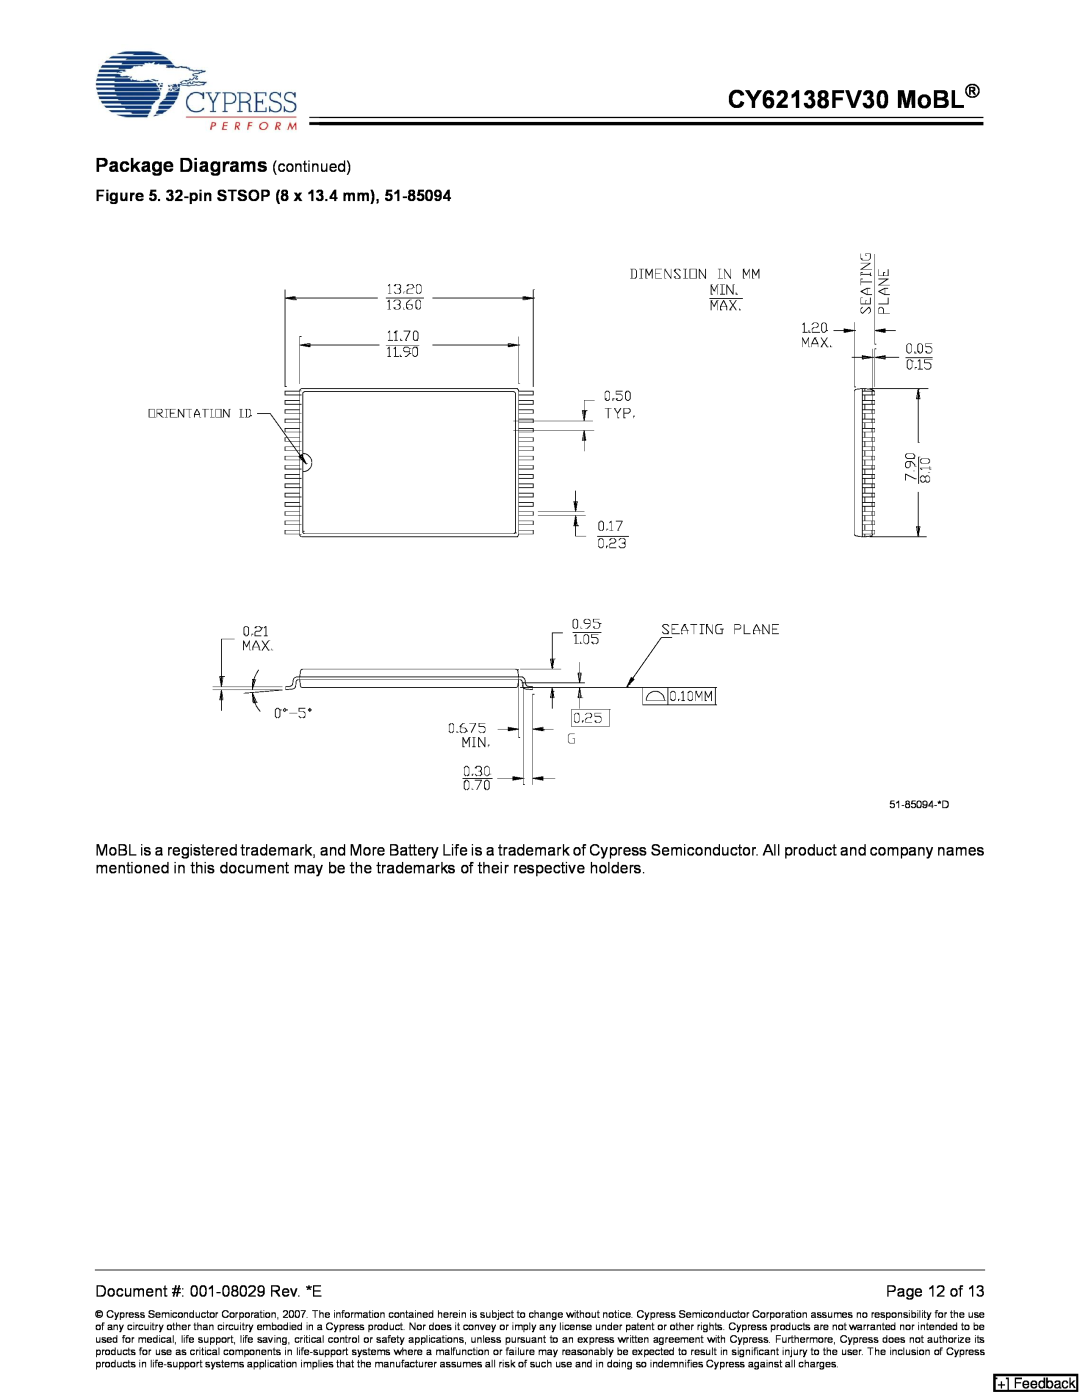 Cypress CY62138CV30 manual CY62138FV30 MoBL, Package Diagrams continued, 32-pin STSOP 8 x 13.4 mm, Page 12 of, + Feedback 